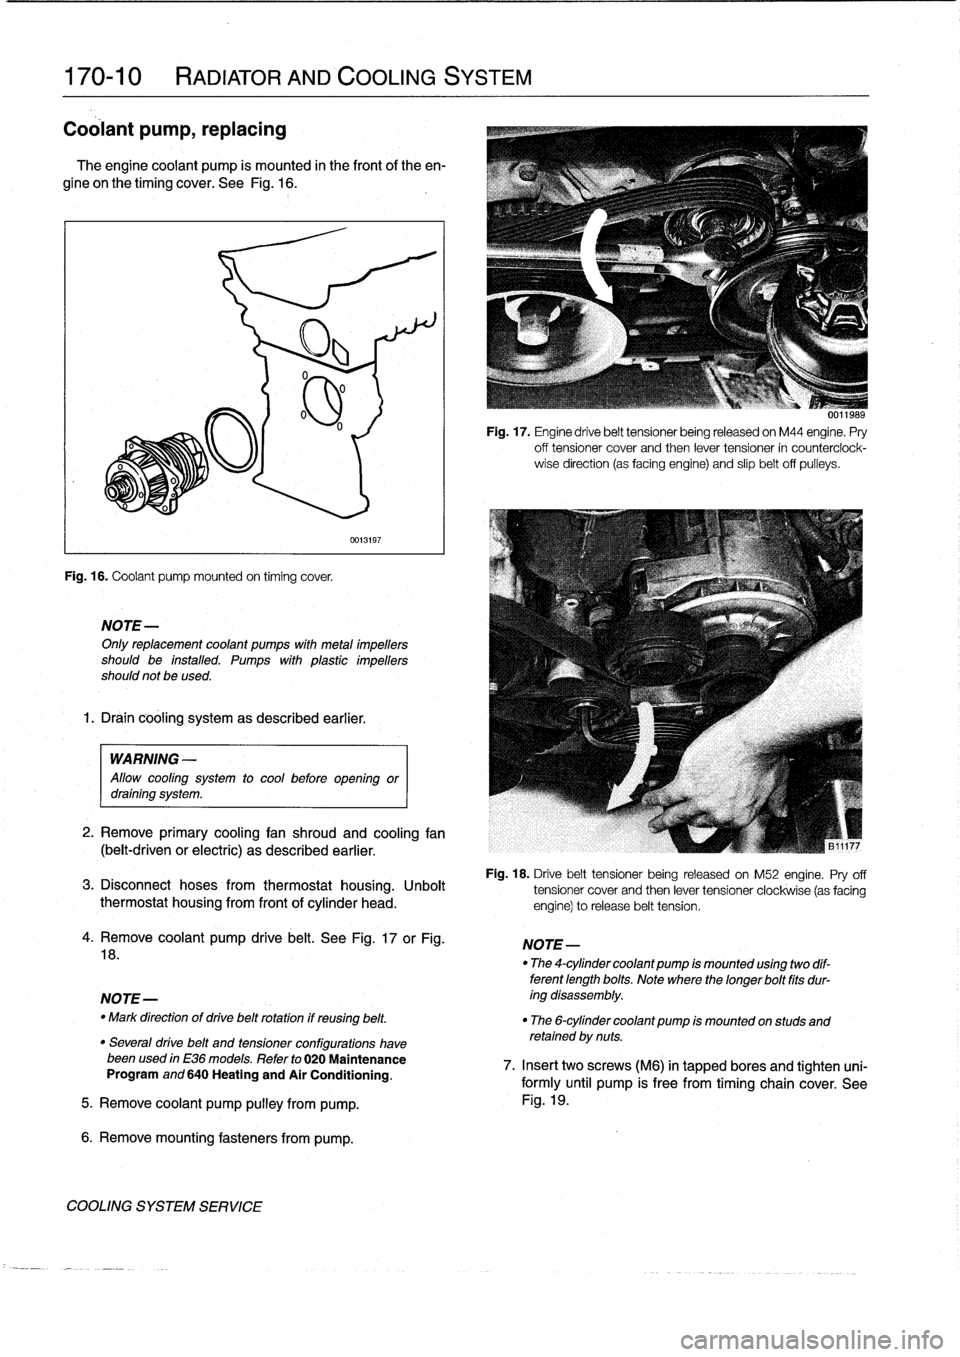 BMW 328i 1997 E36 Workshop Manual 
170-10

	

RADIATOR
AND
COOLING
SYSTEM

Coolant
pump,
replacing

The
engine
coolant
pump
is
mounted
in
the
frontof
the
en-

gine
on
the
timing
cover
.
See
Fig
.
16
.

Fig
.
16
.
Coolant
pump
mounted
